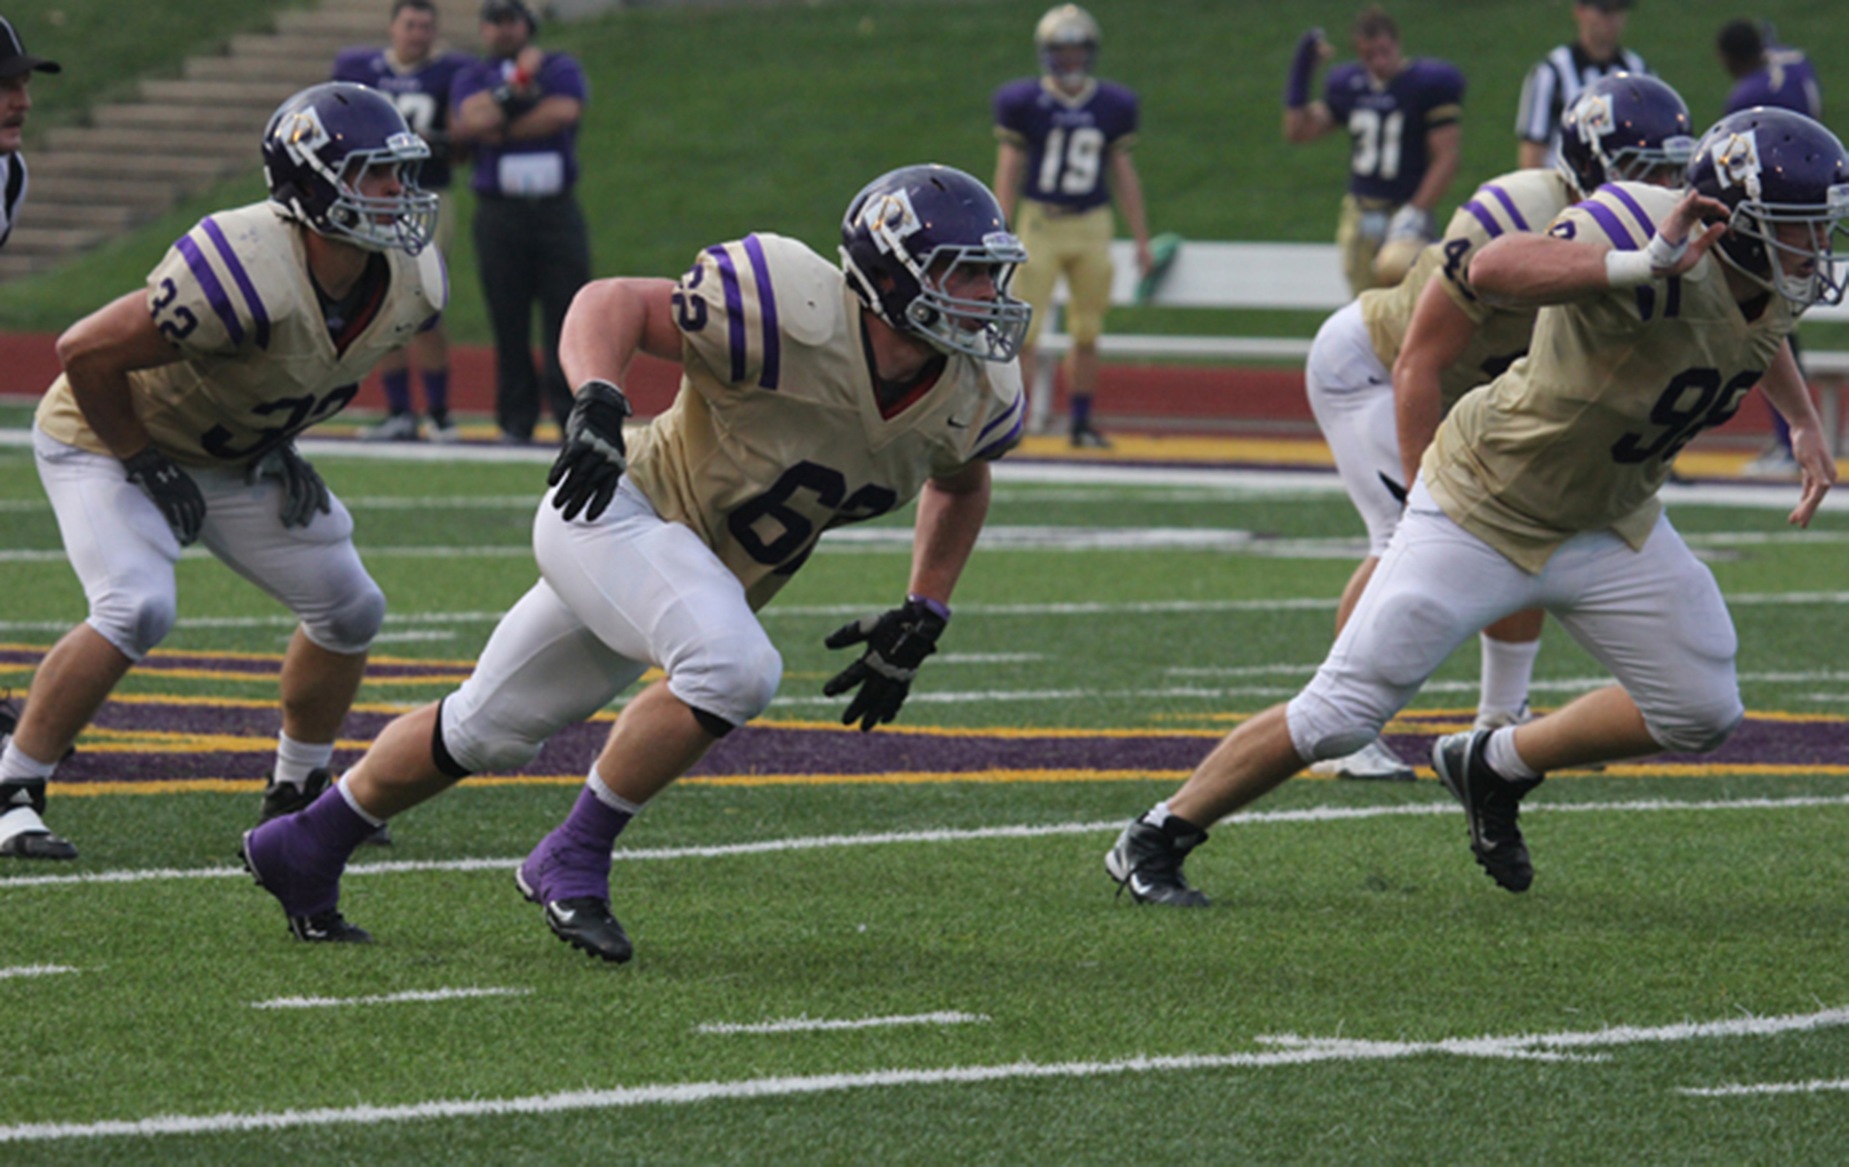 Defense Leads Yellow Jackets in 43-7 Victory Over Earlham